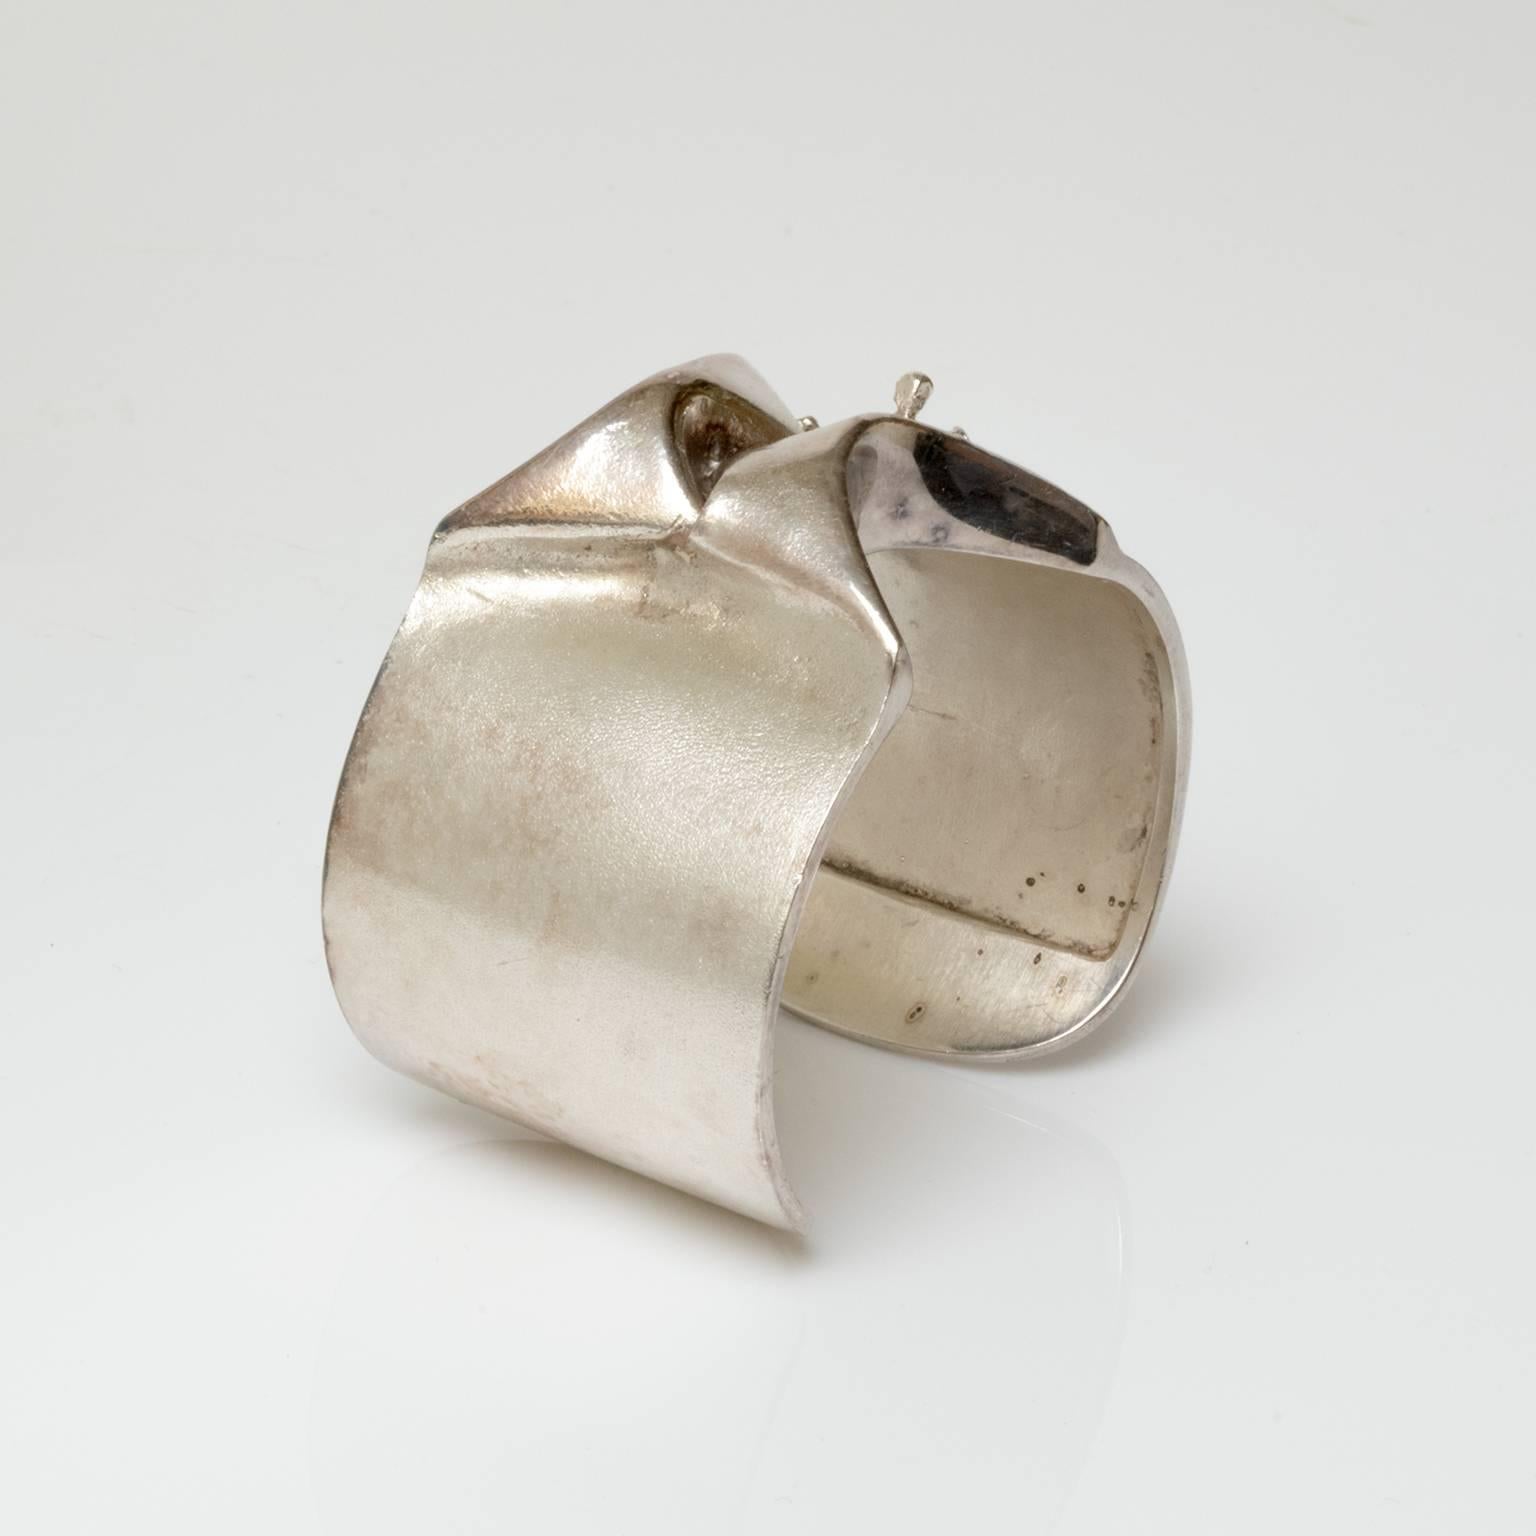 Patinated Sterling silver bracelet designed by the great Bjorn Weckstrom for Lapponia, Finland